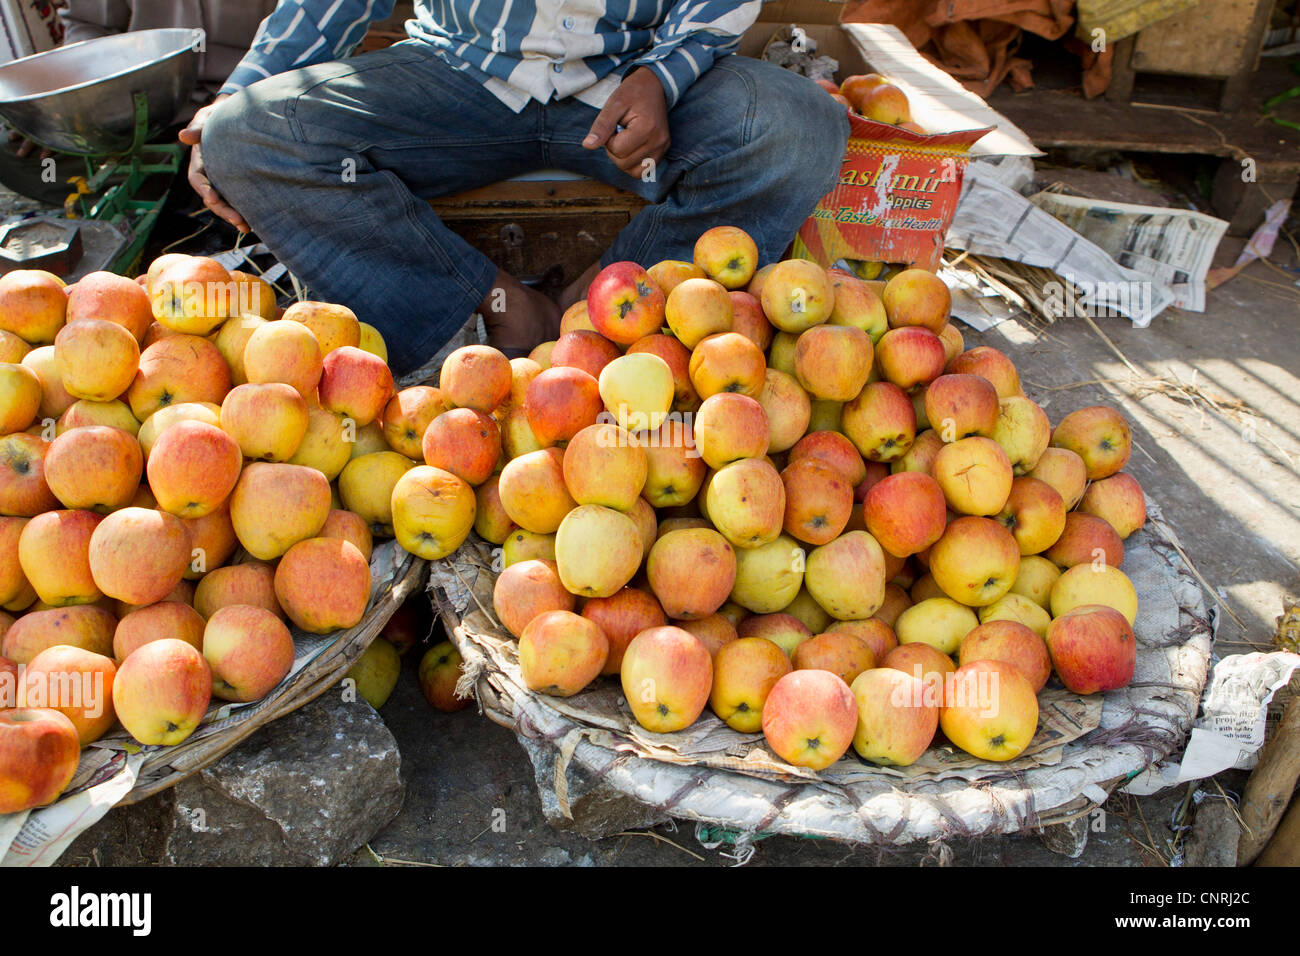 Apples for sale in street market Stock Photo